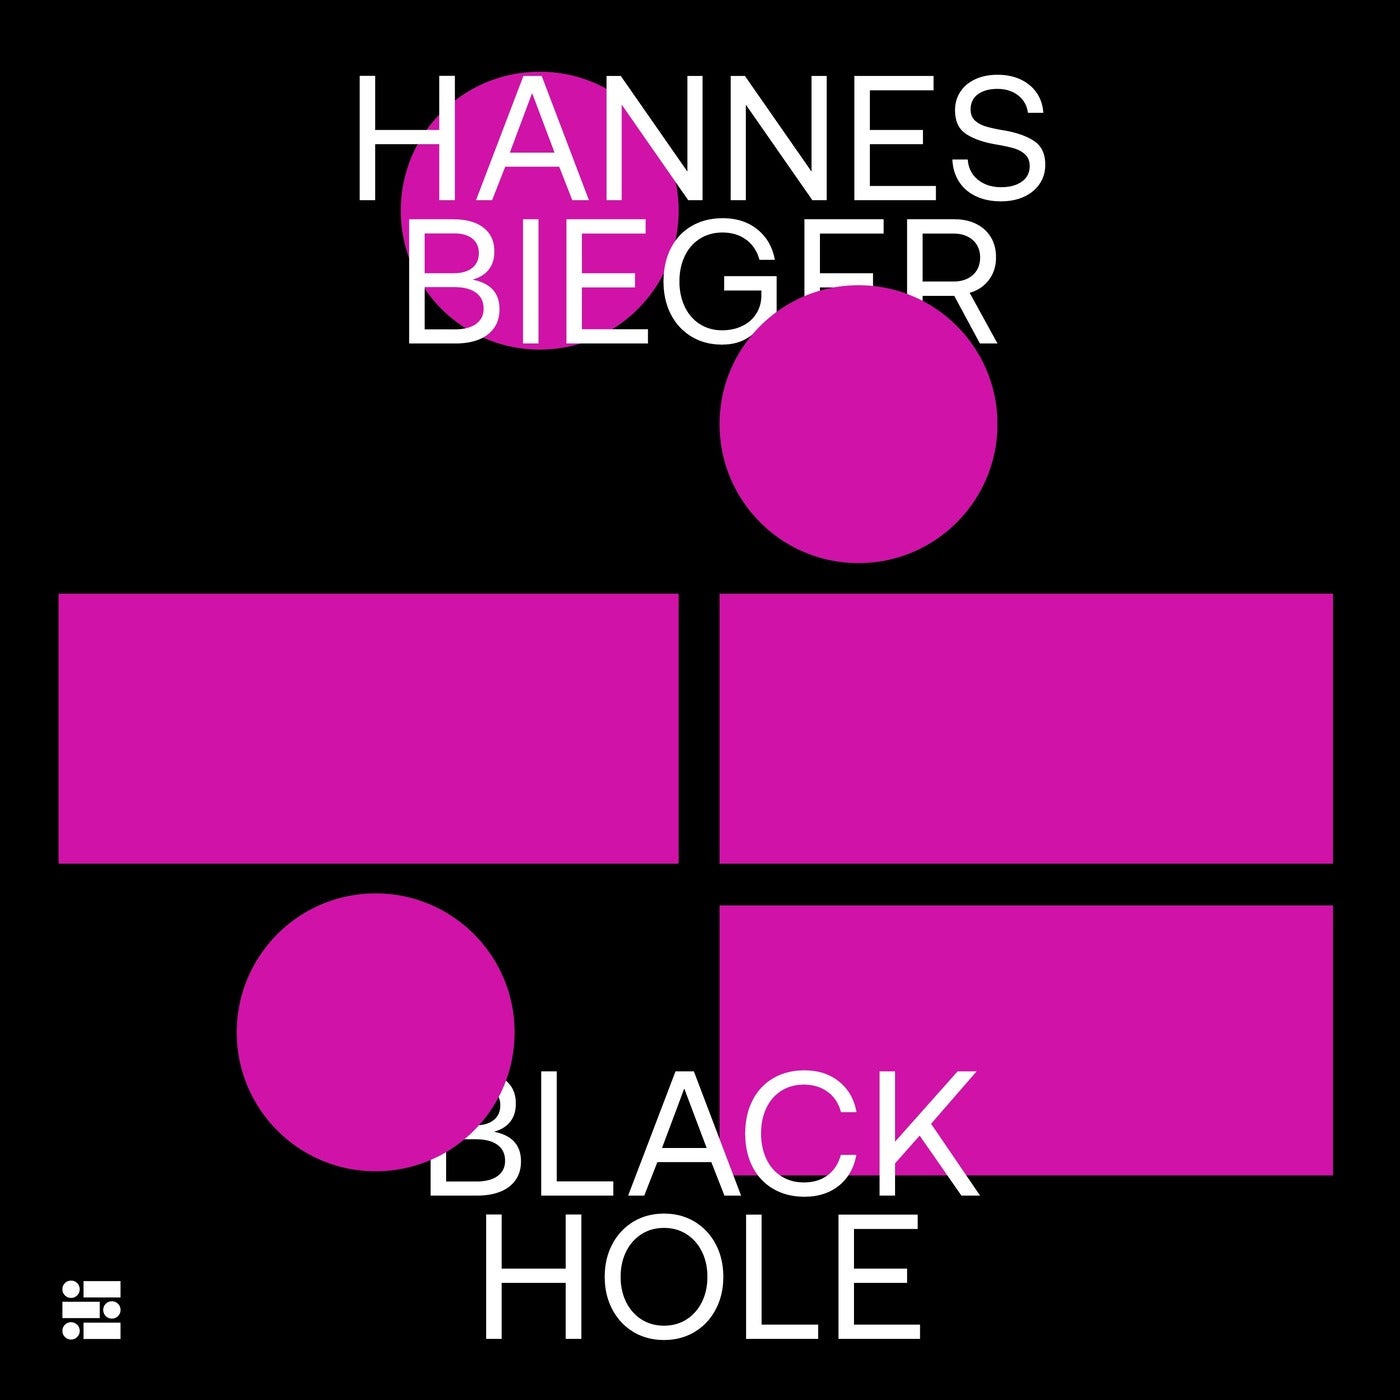 Hannes Bieger drops his long awaited single Black Hole on his new label Elektrons